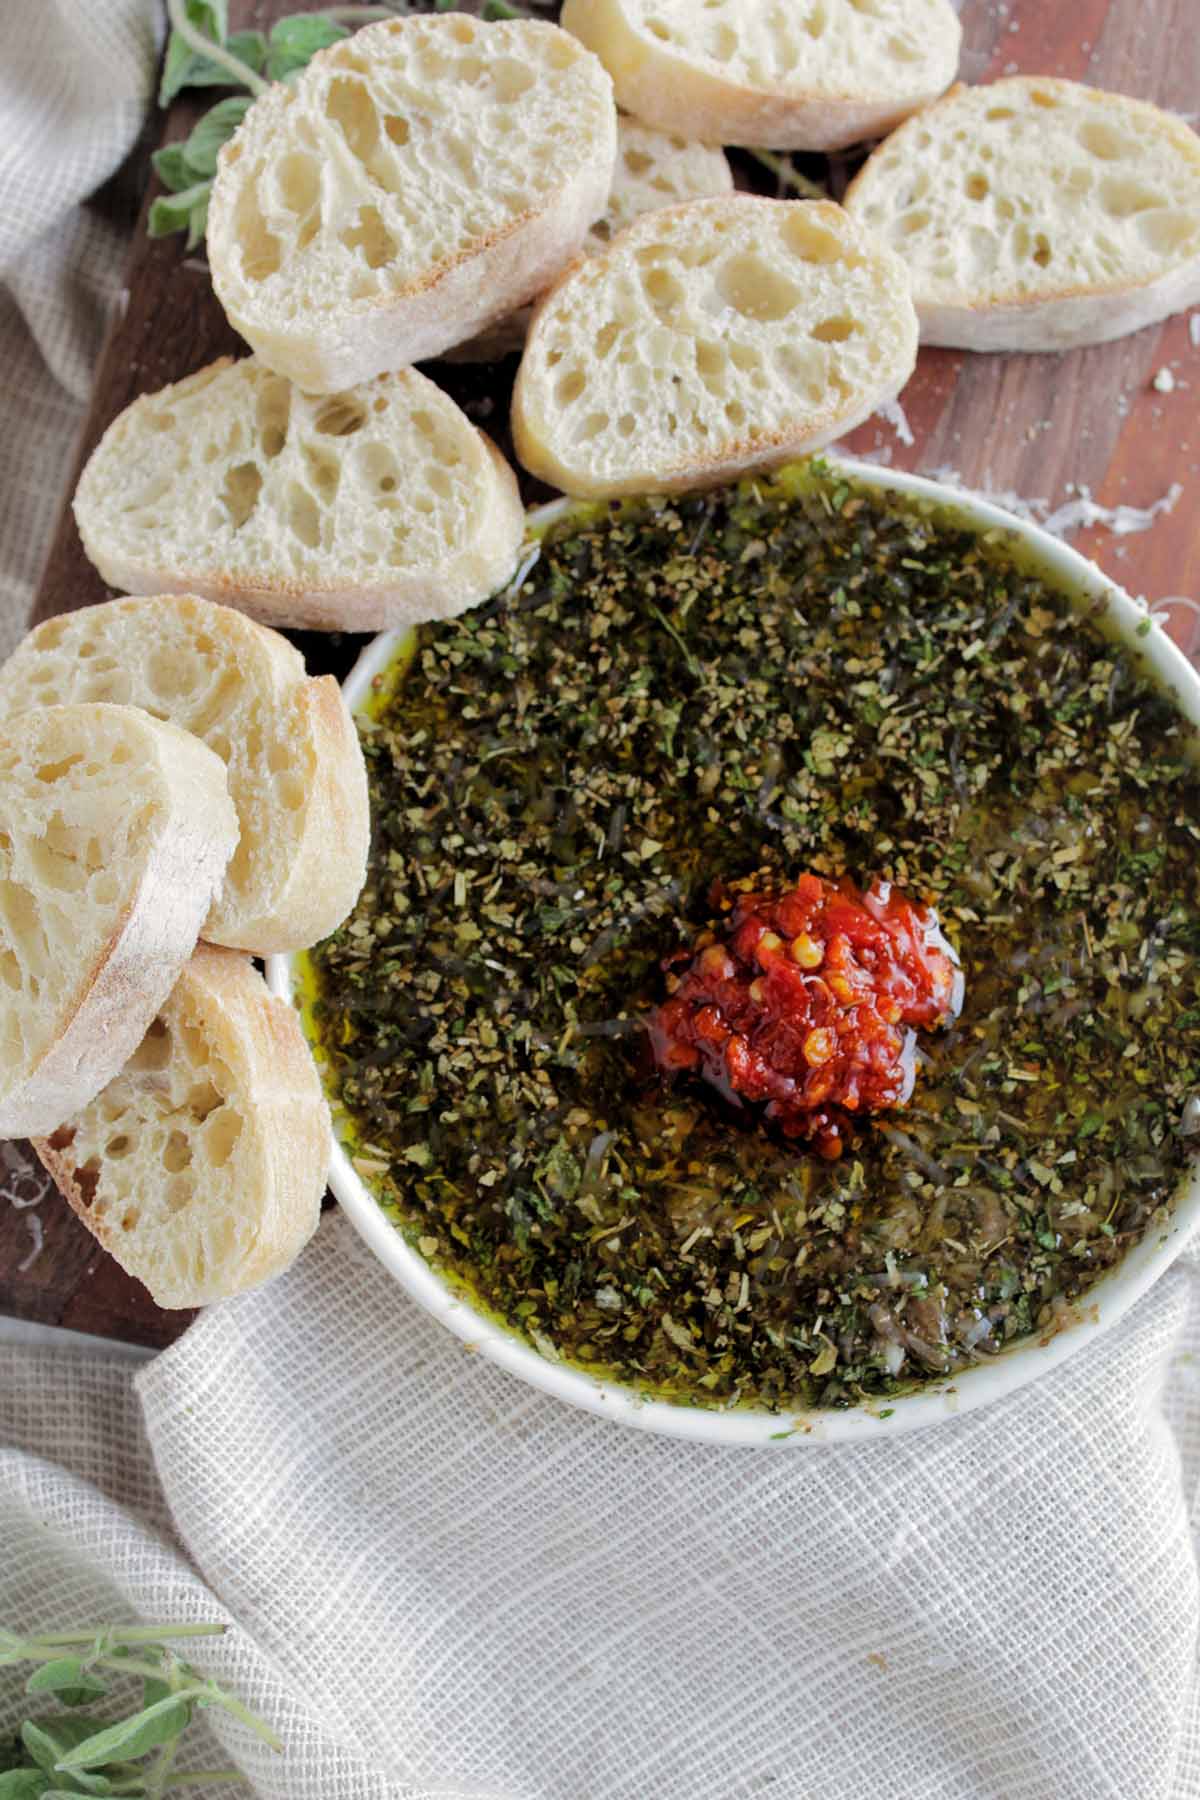 bread dipping oil with herbs